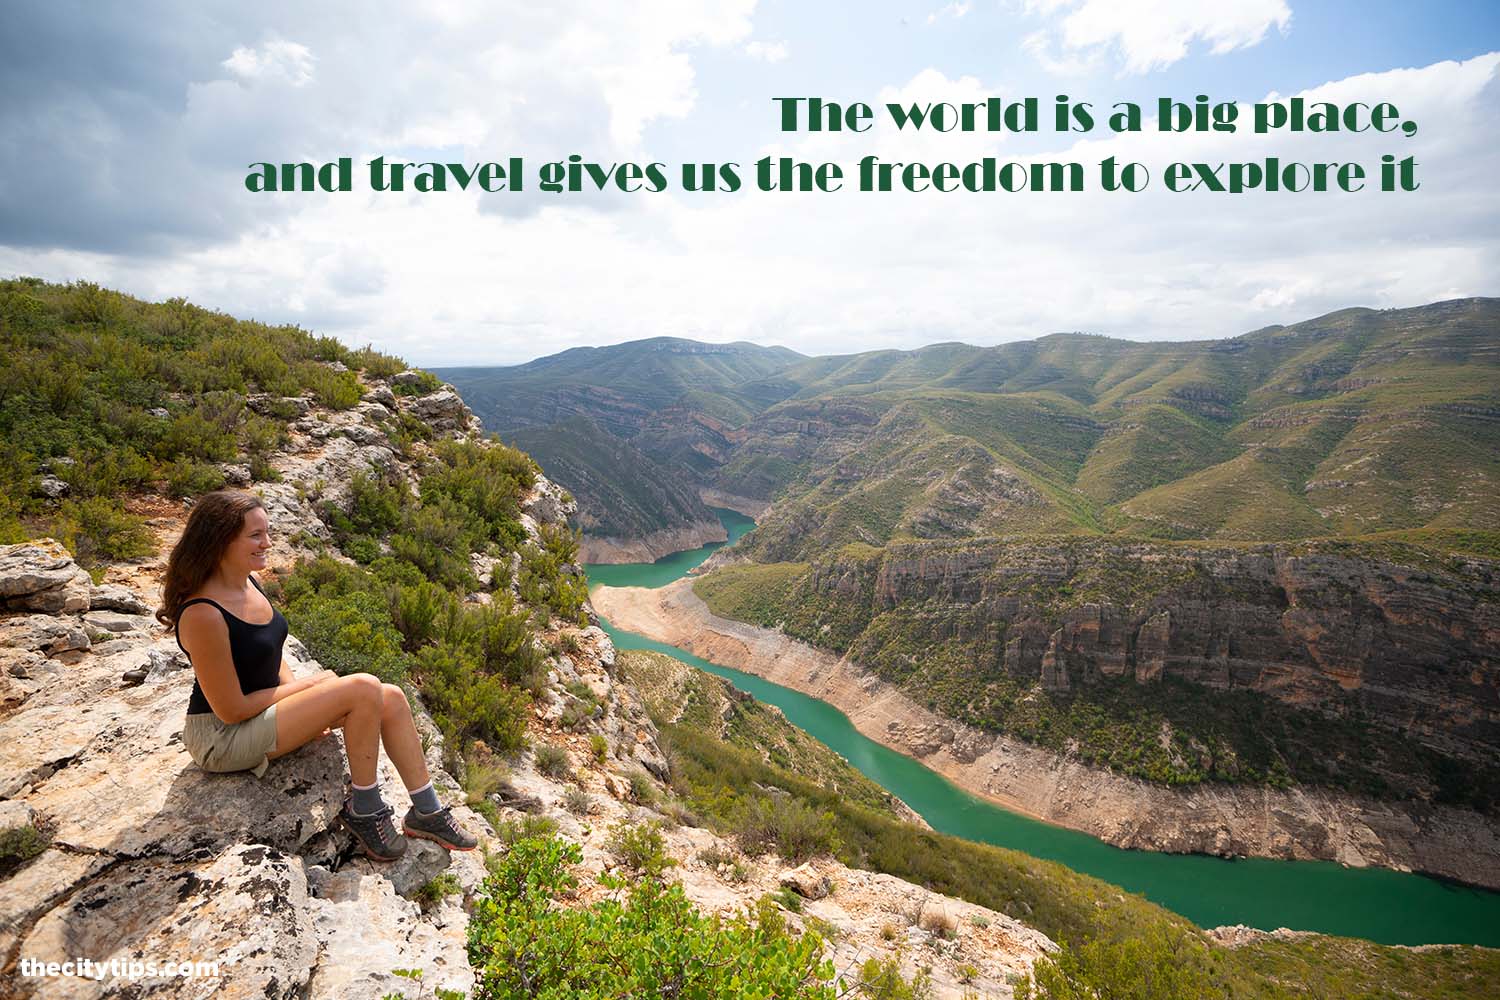 "The world is a big place, and travel gives us the freedom to explore it."